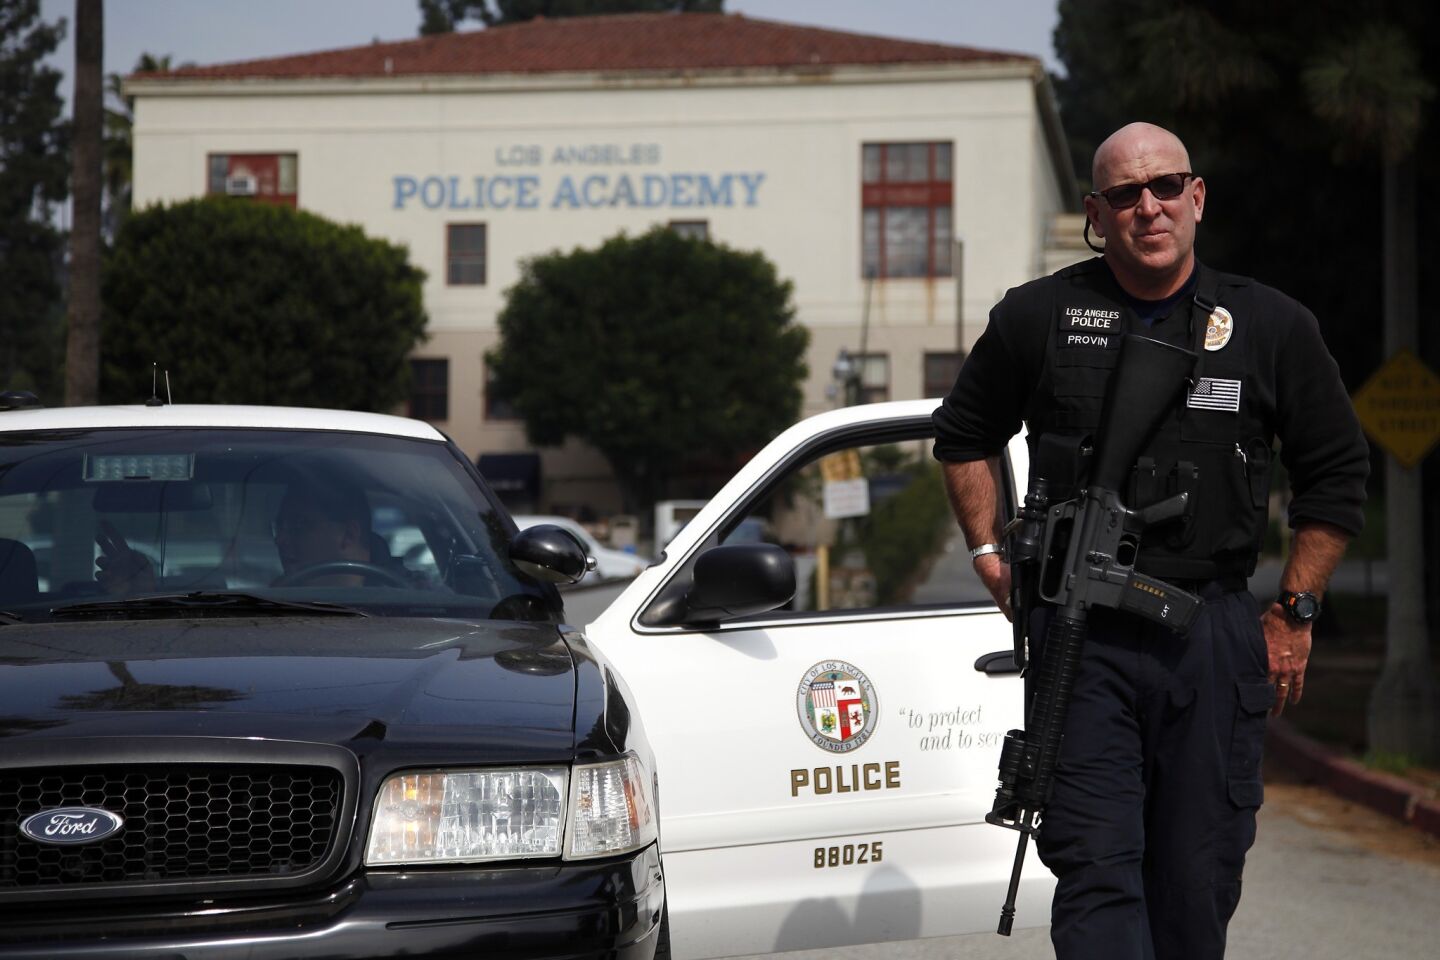 LAPD Officer Keith Provin keeps watch over the Los Angeles Police Academy, which was on heightened alert as the manhunt continued.